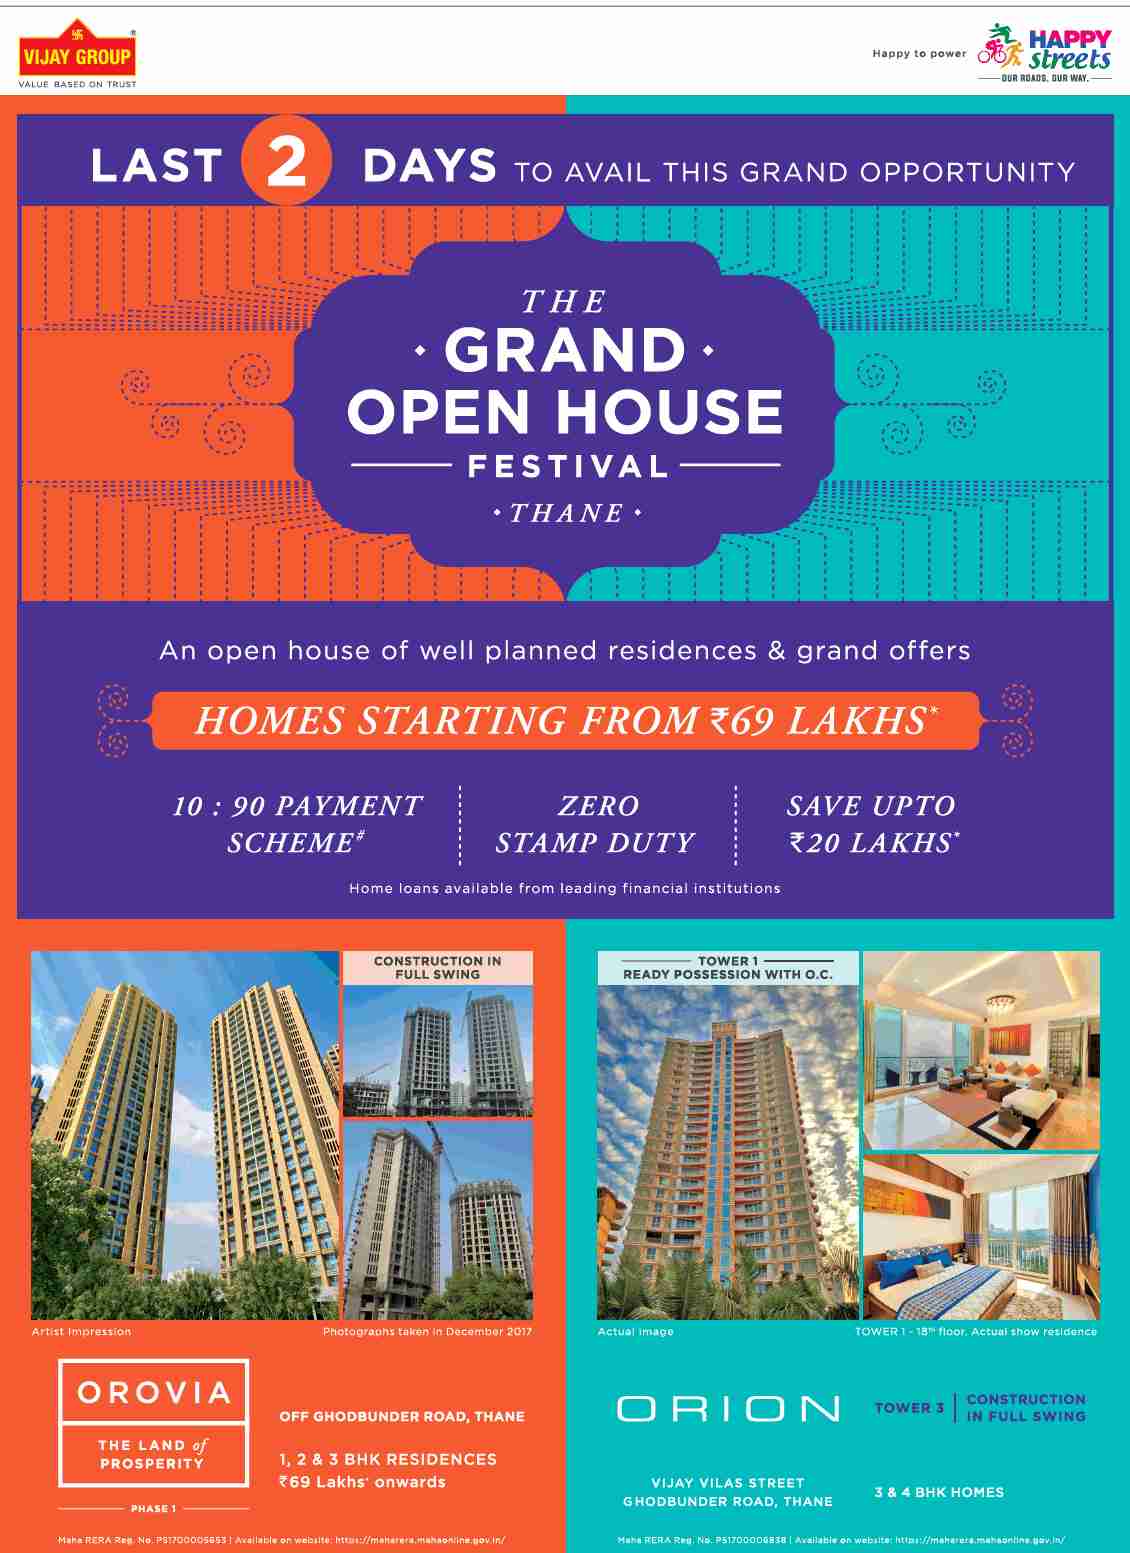 An open house of well-planned residences and grand offers during The grand open house festival in Mumbai